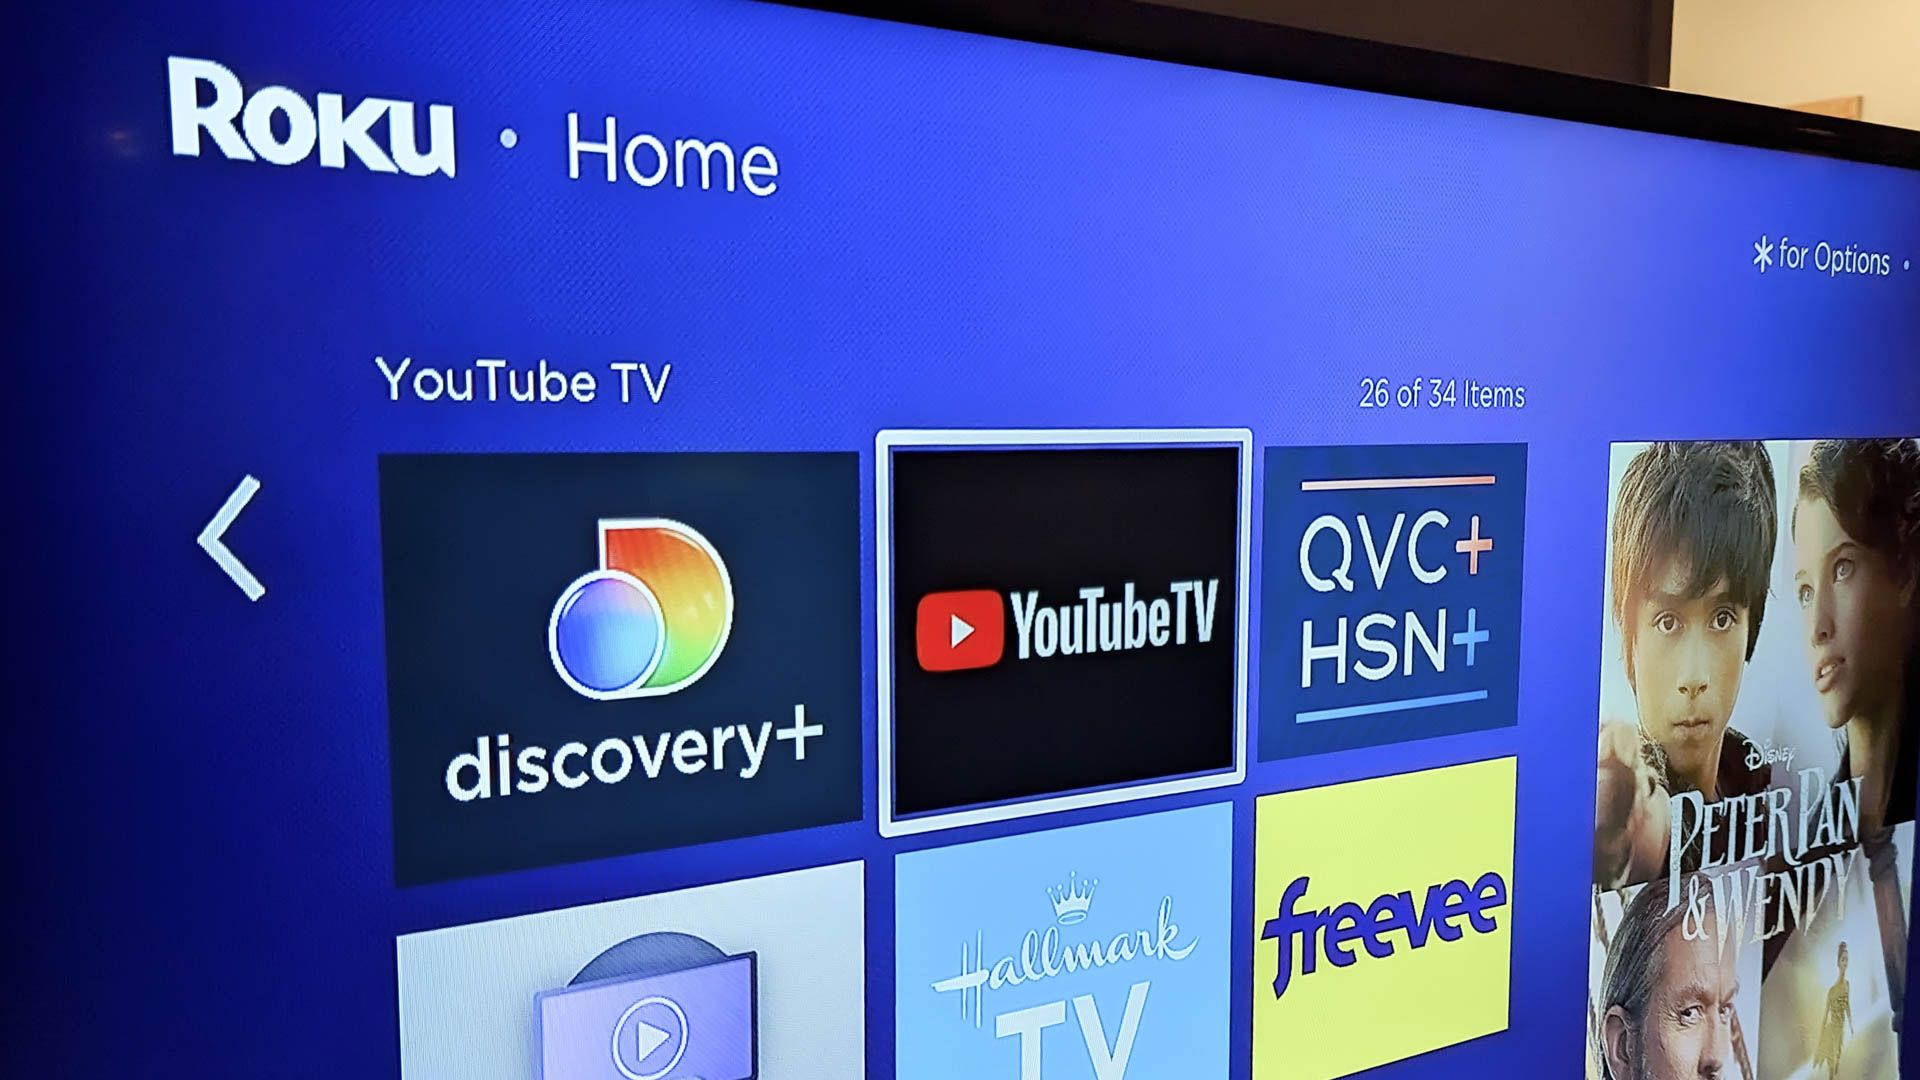 Roku home screen open on a tv with YouTube TV highlighted